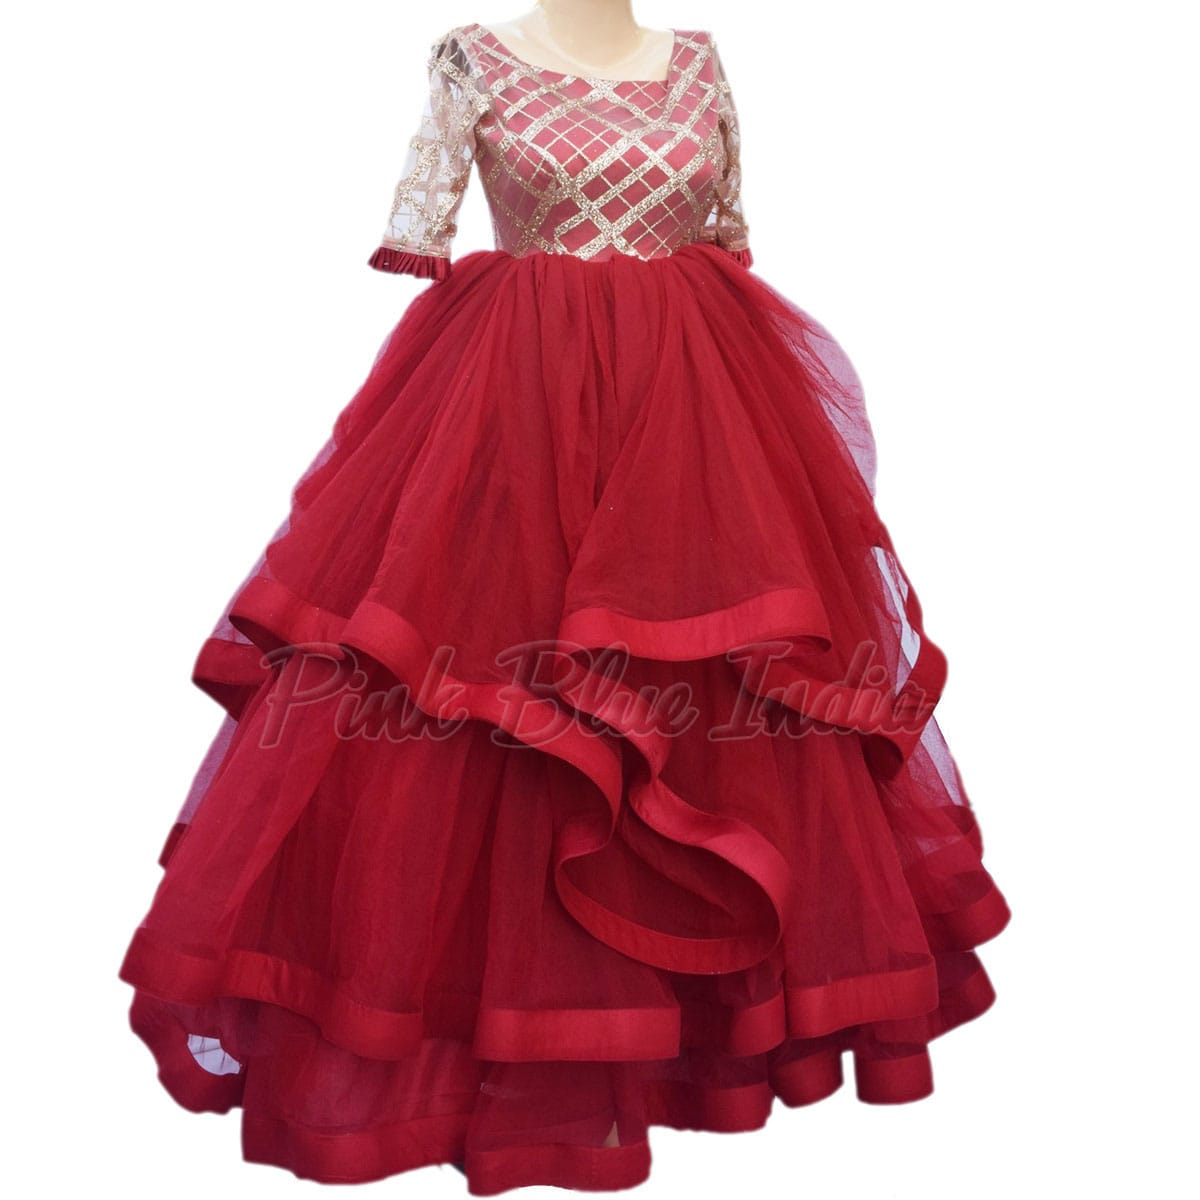 Buy White Button New Kids Birthday Party Gown Dress for Girl (2-3 Years,  Morpeach) at Amazon.in